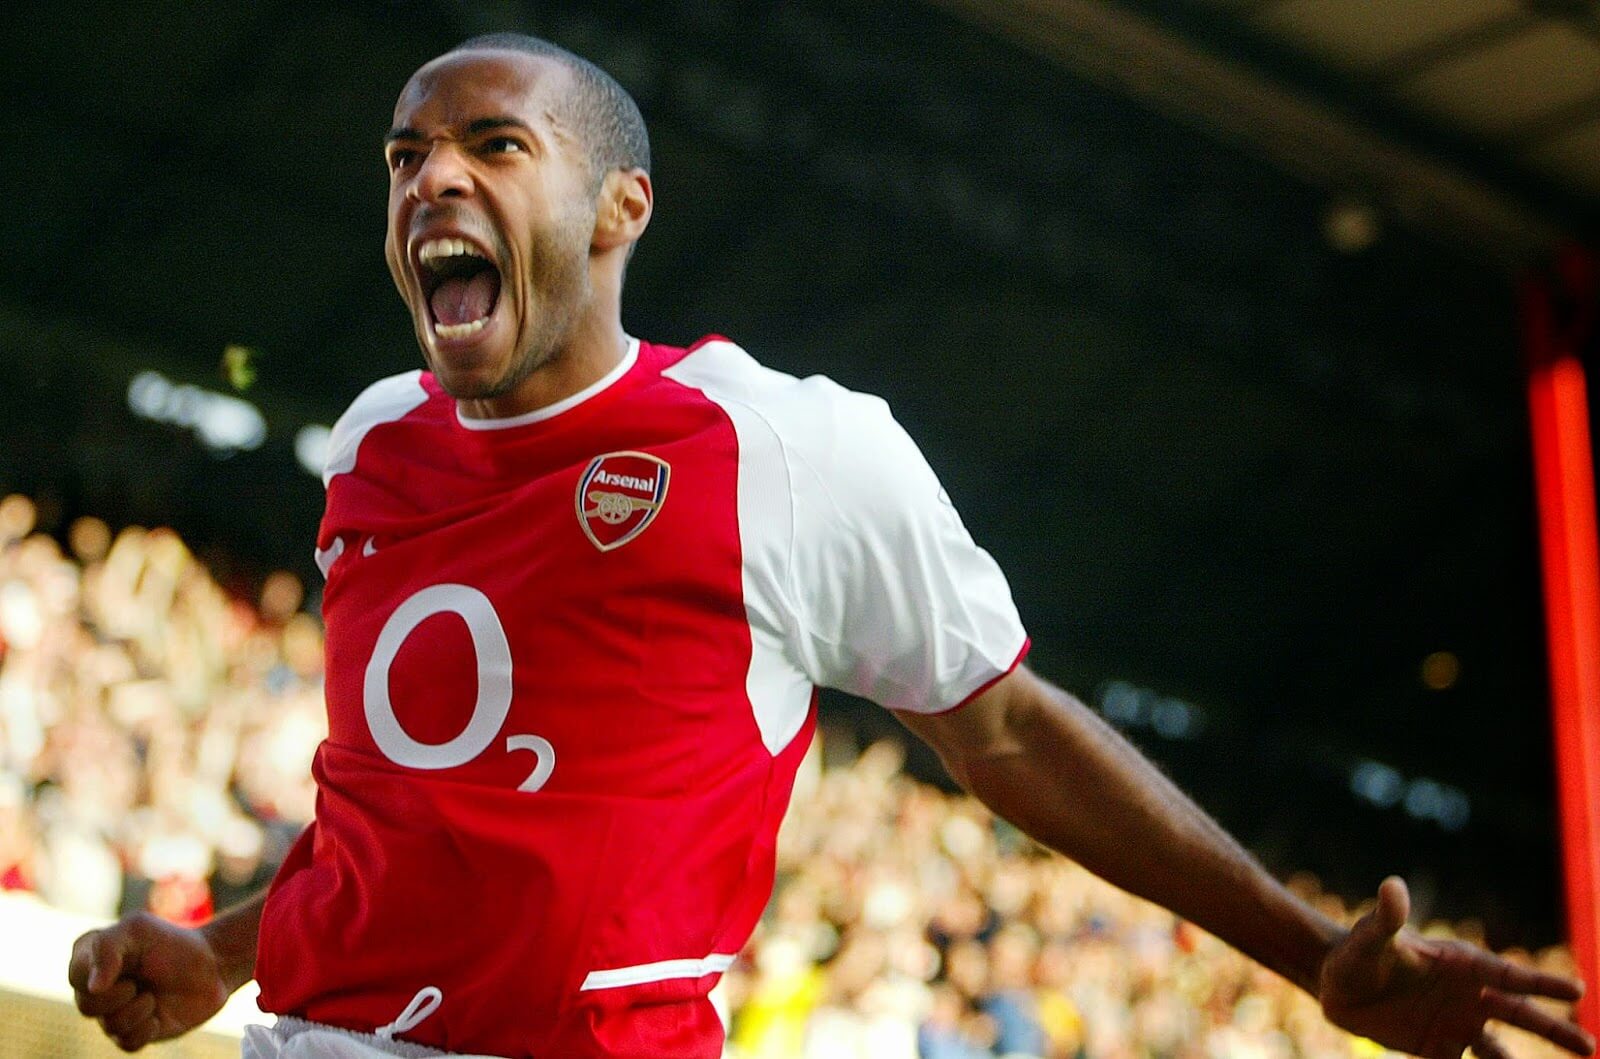 Thierry Henry Bio, Age, Stats and Bio1600 x 1059